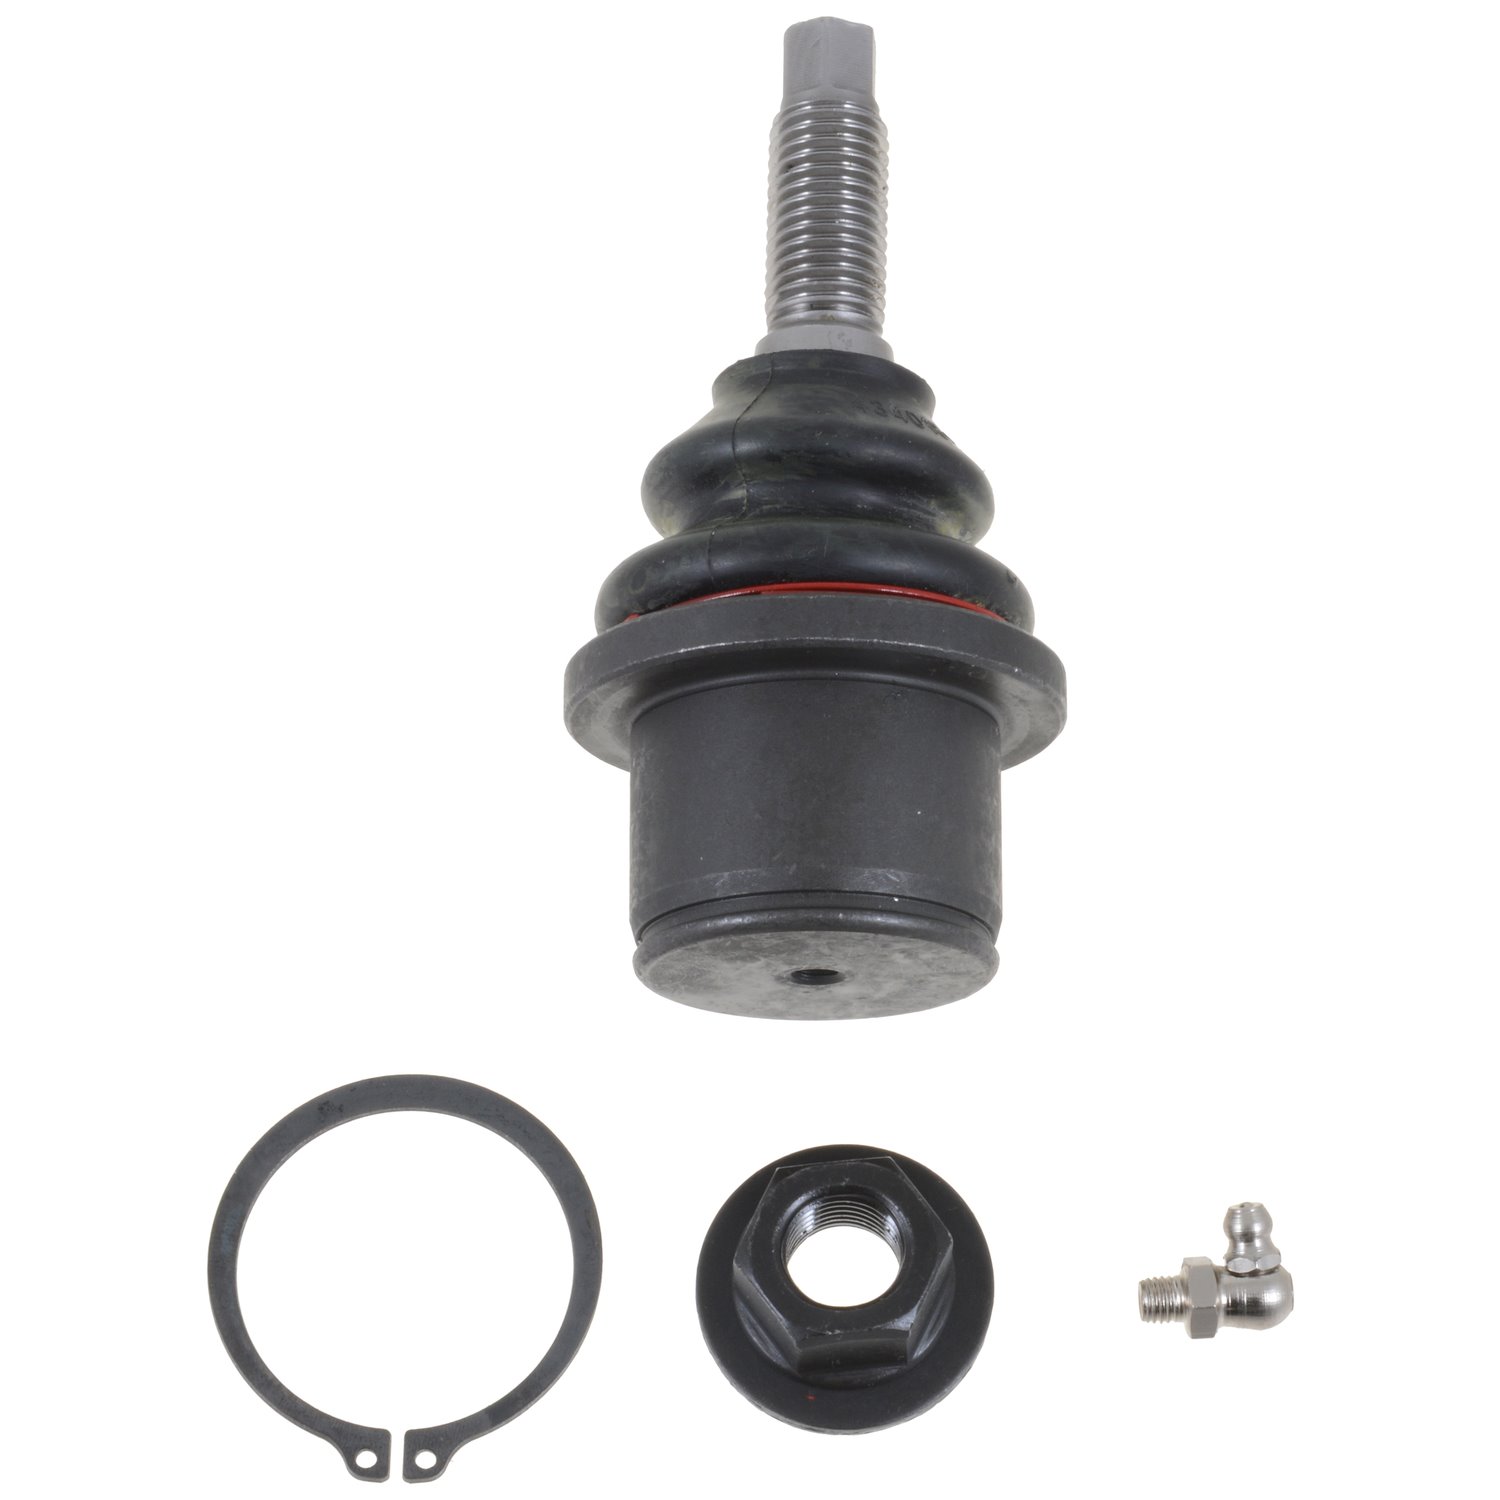 JBJ1126 Ball Joint Fits Select Ford Models, Position: Left/Driver or Right/Passenger, Front Lower